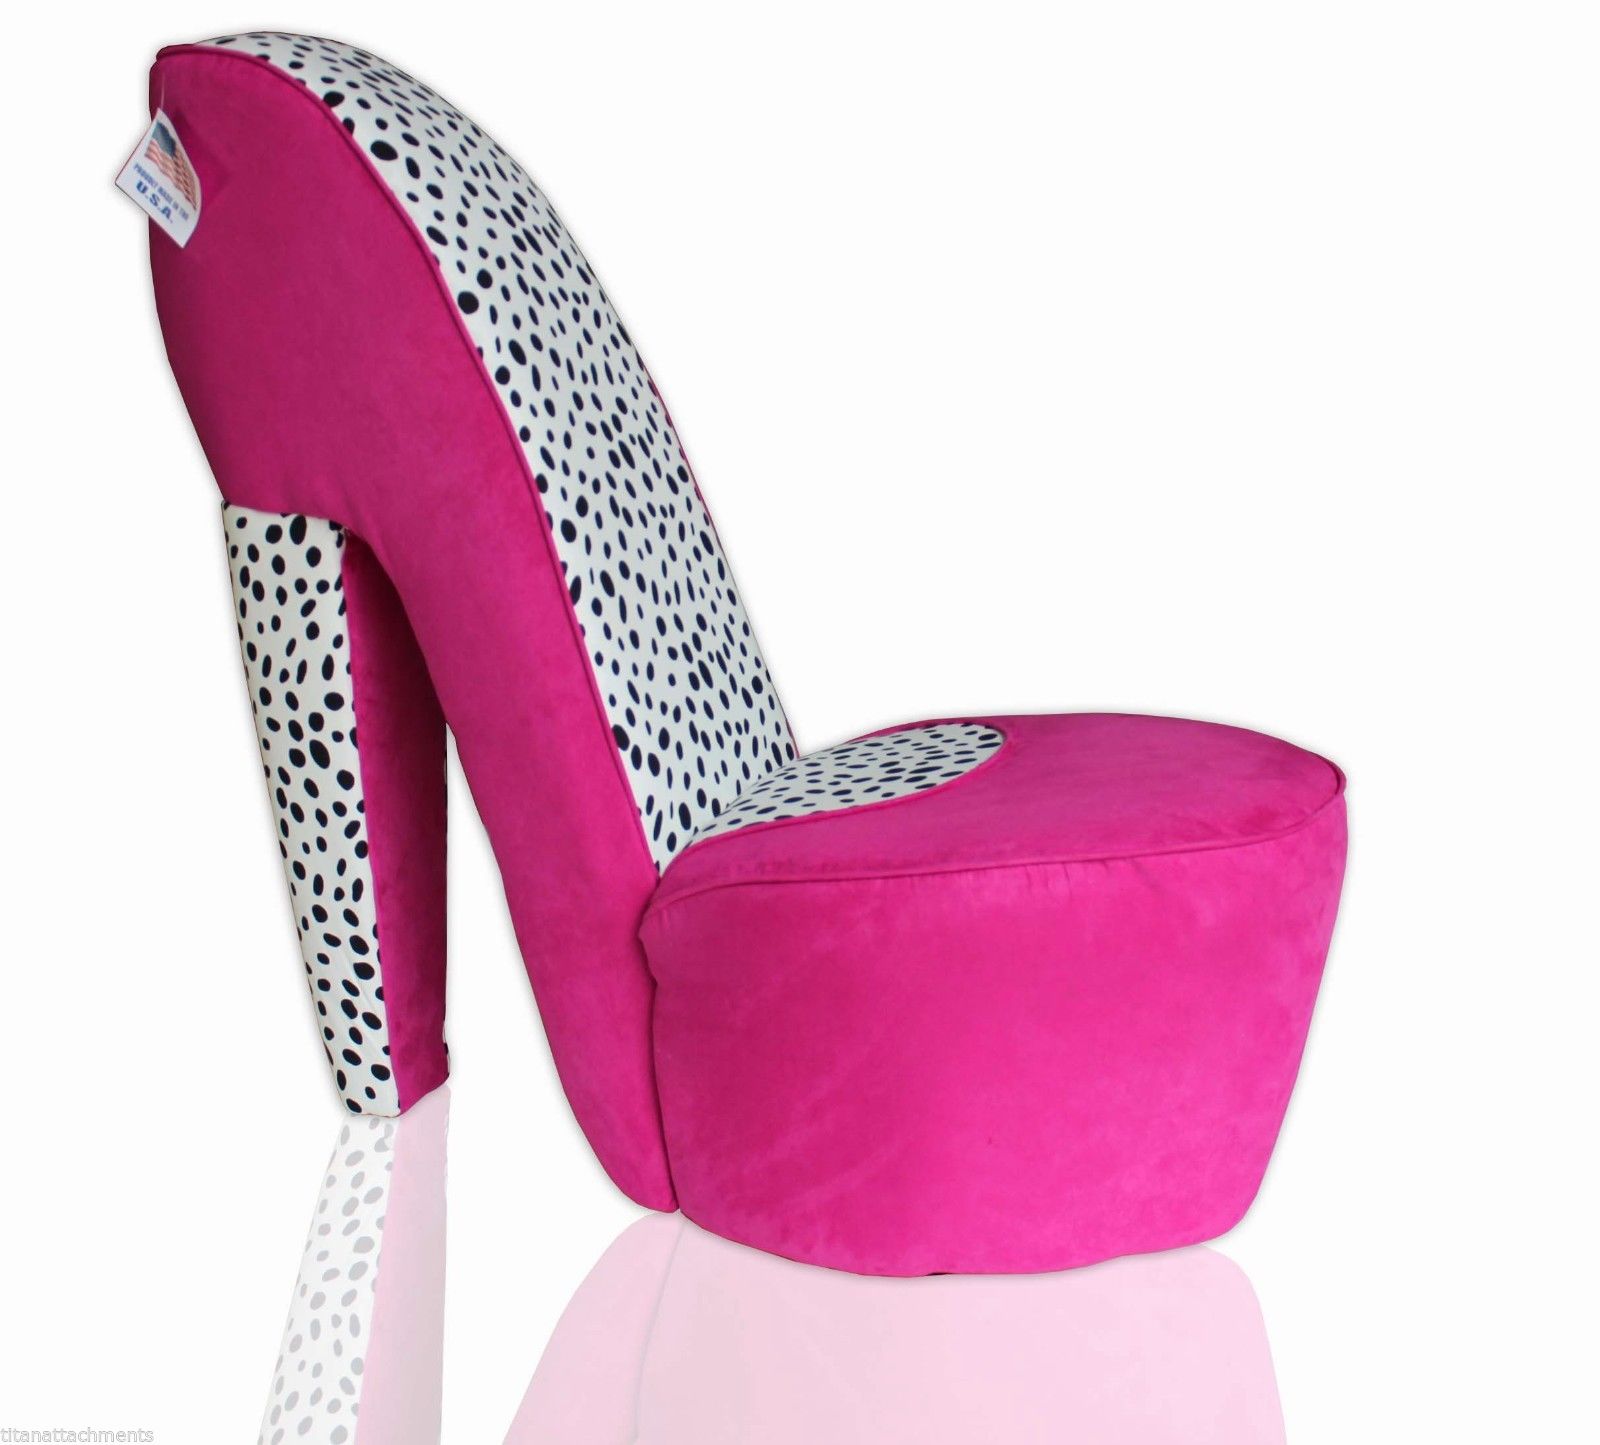 High Heel Shoe Chair Full Size Pink, Pink And Black High Heel Shoe Chair